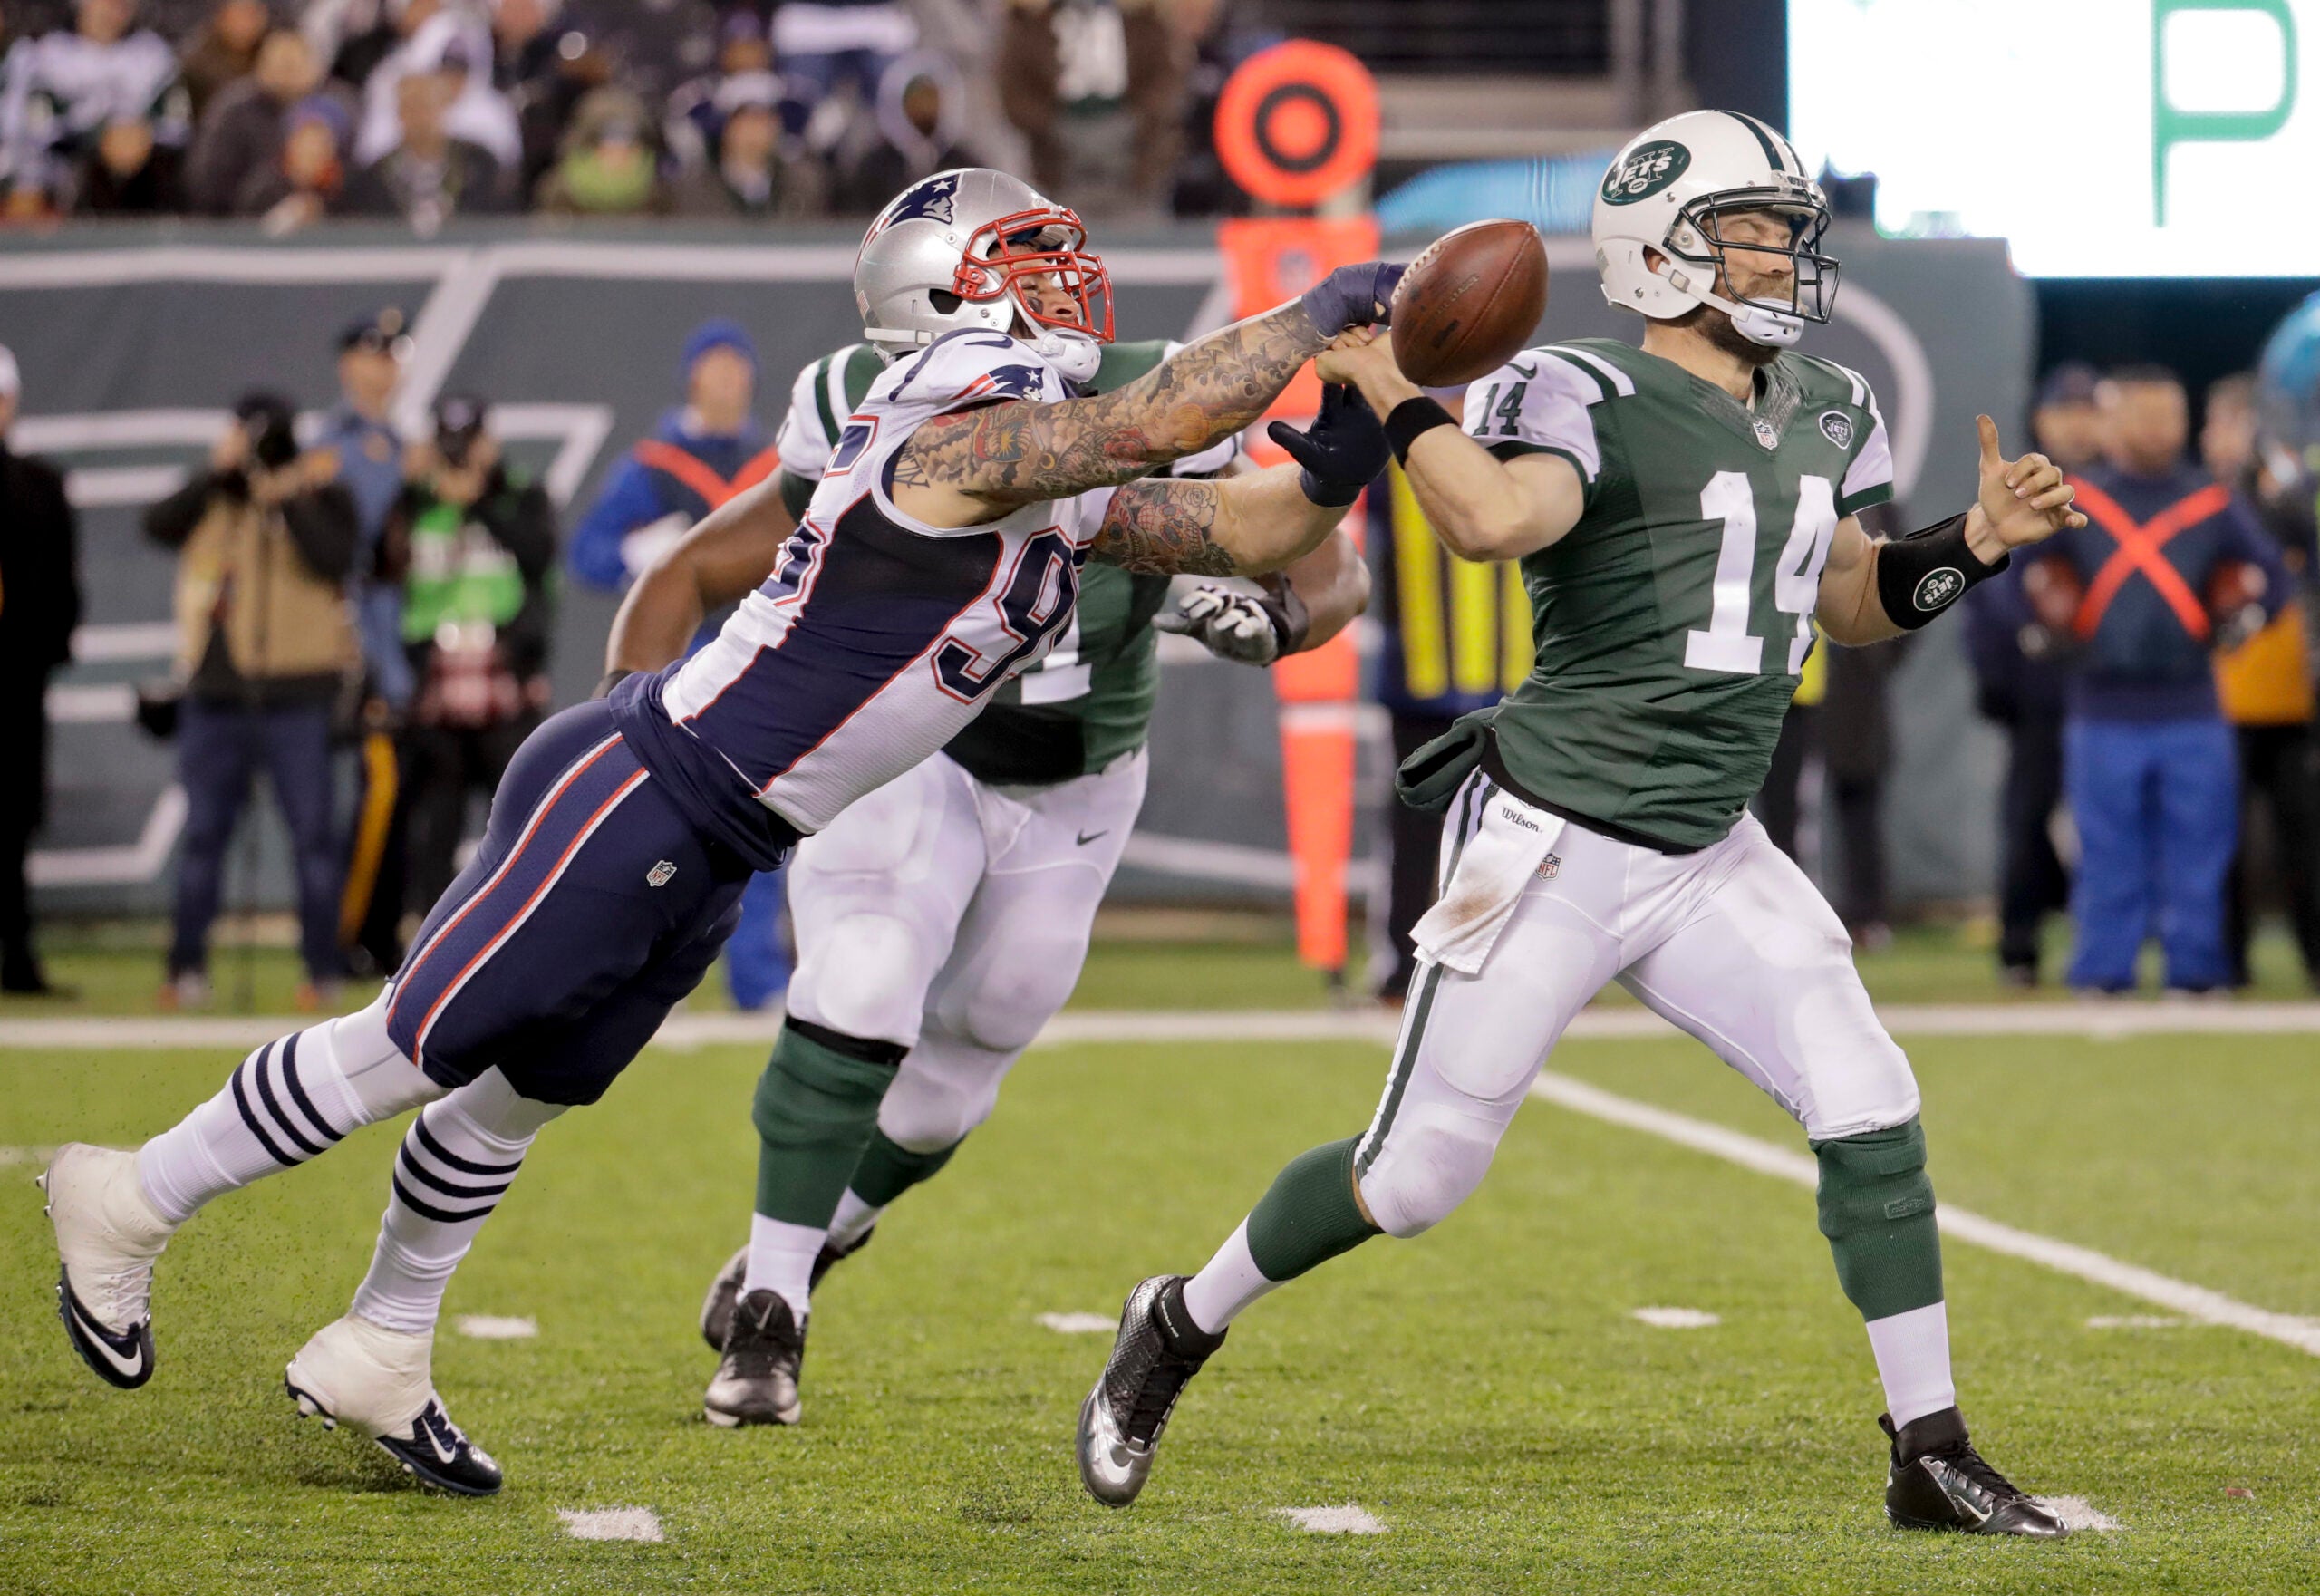 5 takeaways from the Patriots' win over the Jets